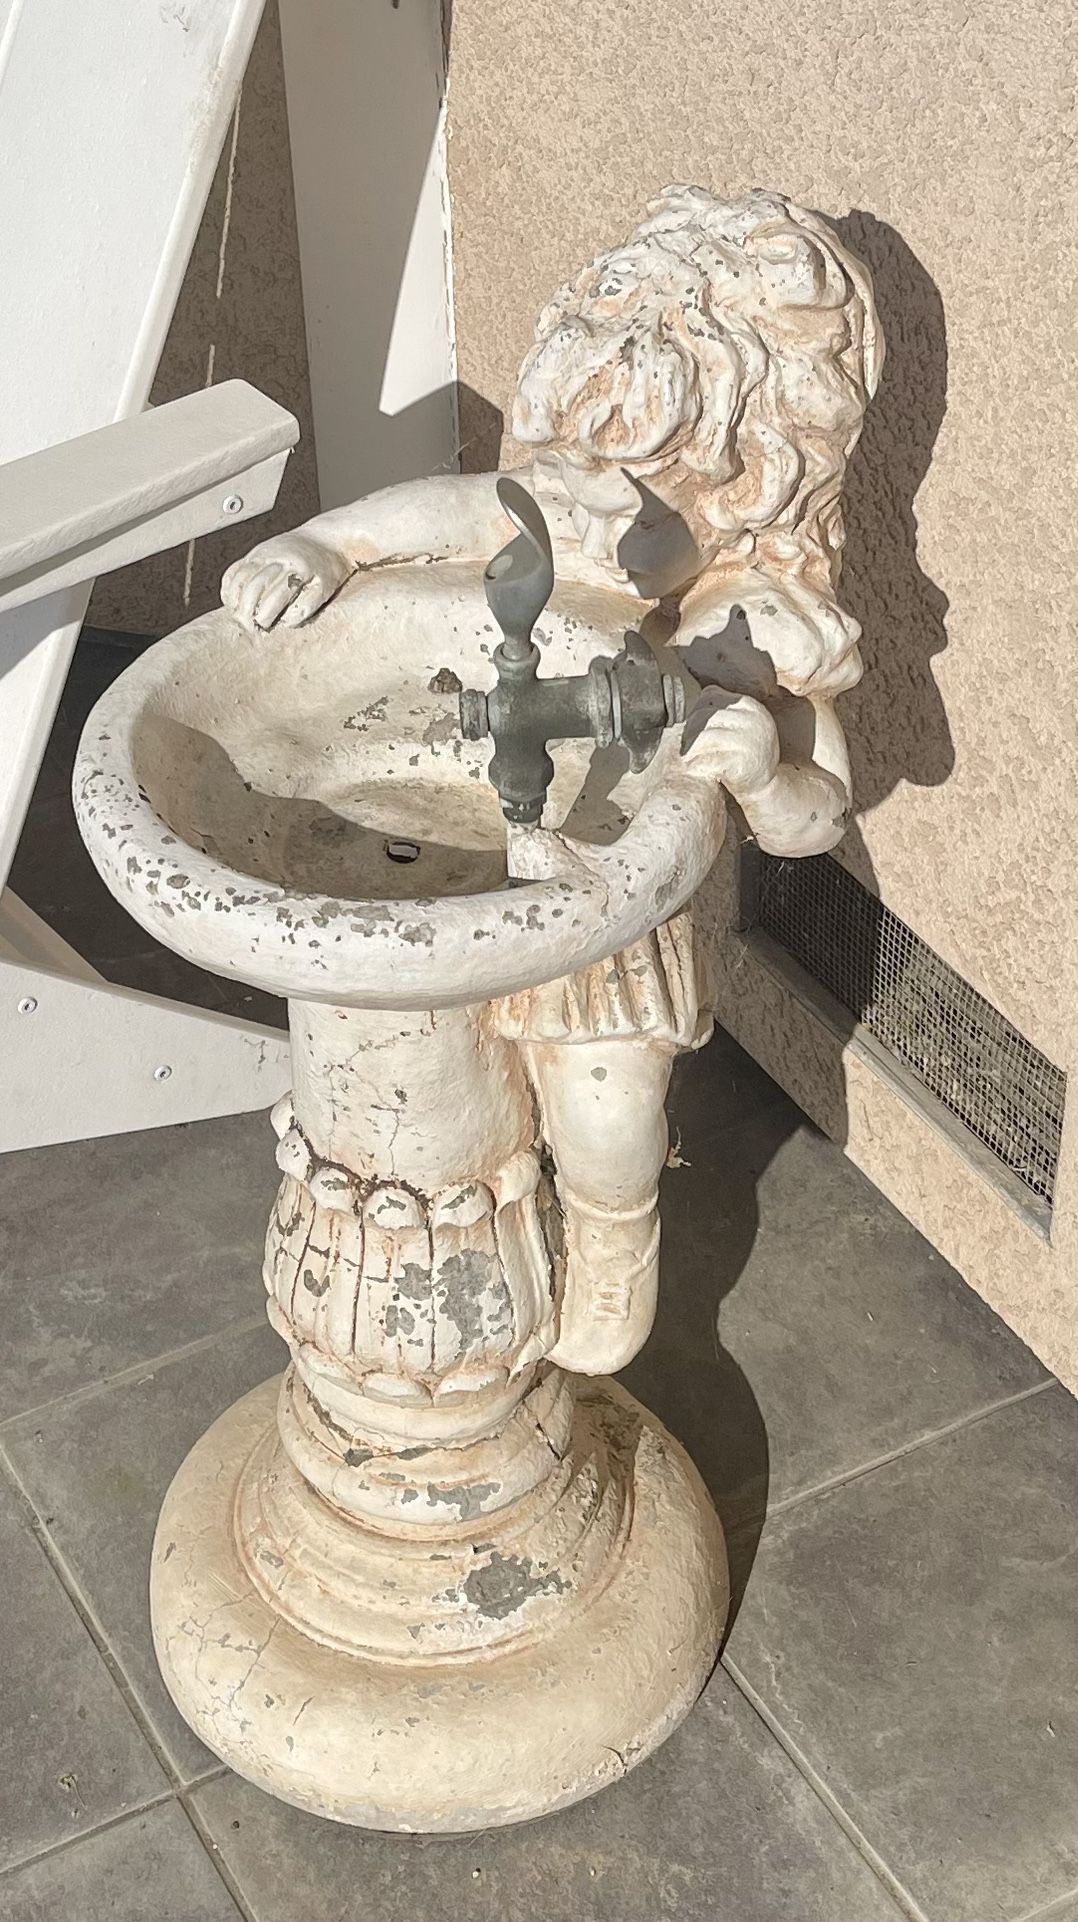 Fountain / Drinking Faucet